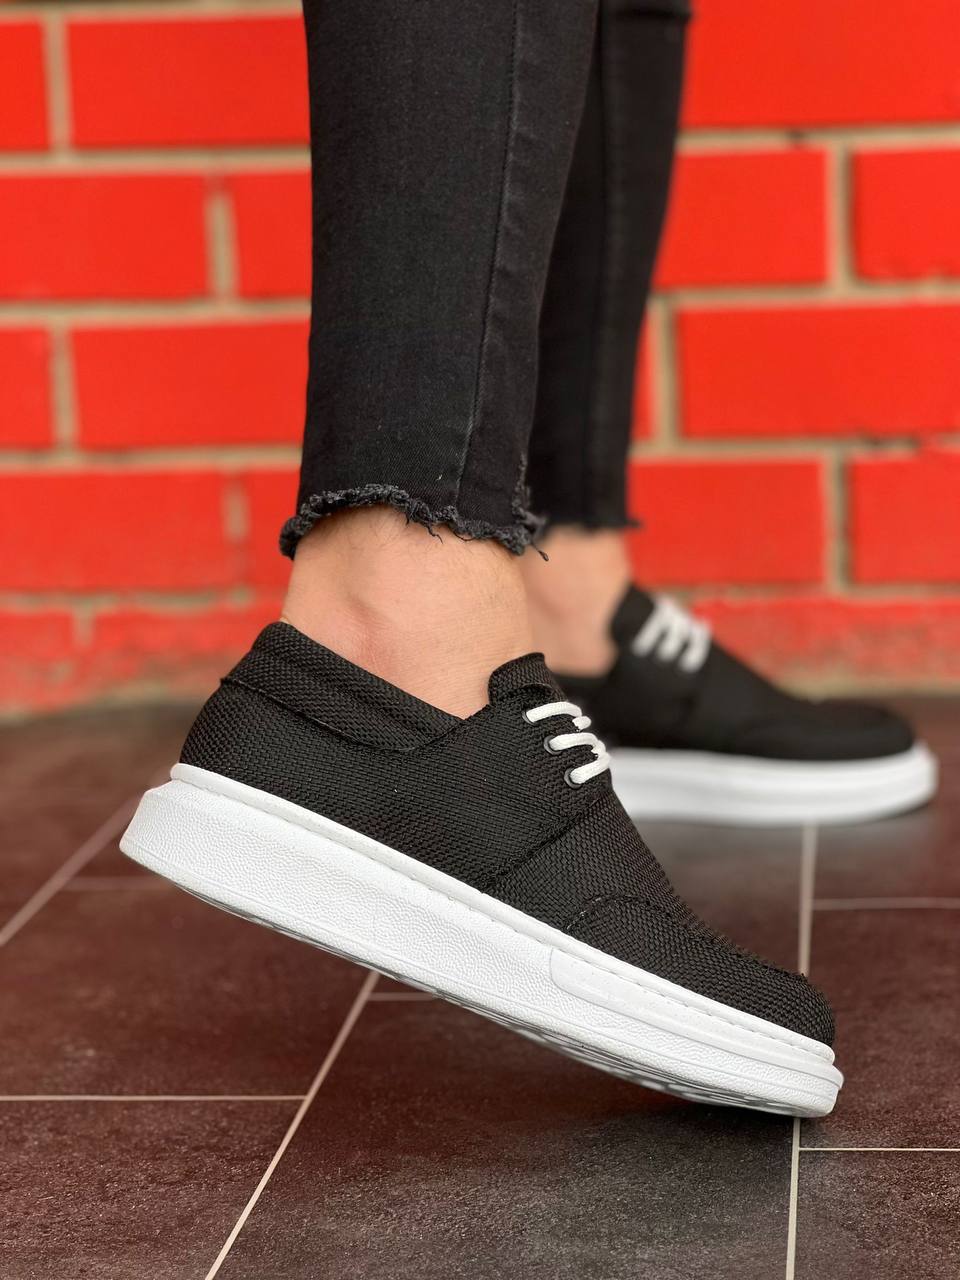 KB-042 Lace-Up Black Casual Men's Sneakers Shoes - STREETMODE™